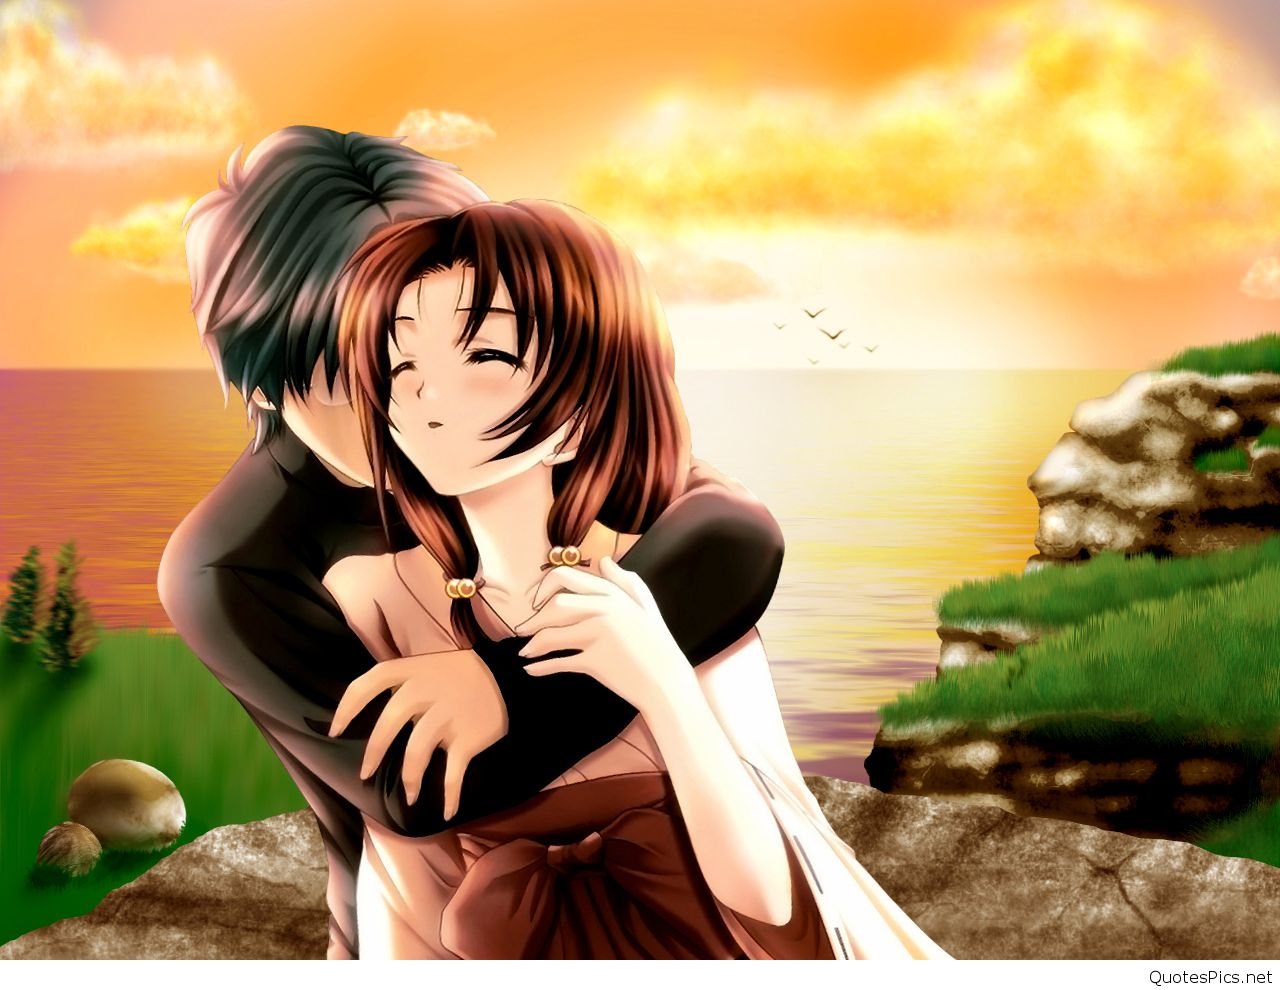 Cute Couple Wallpaper With Quotes 1080p Baby - Romantic Couple Pic Cartoon - HD Wallpaper 